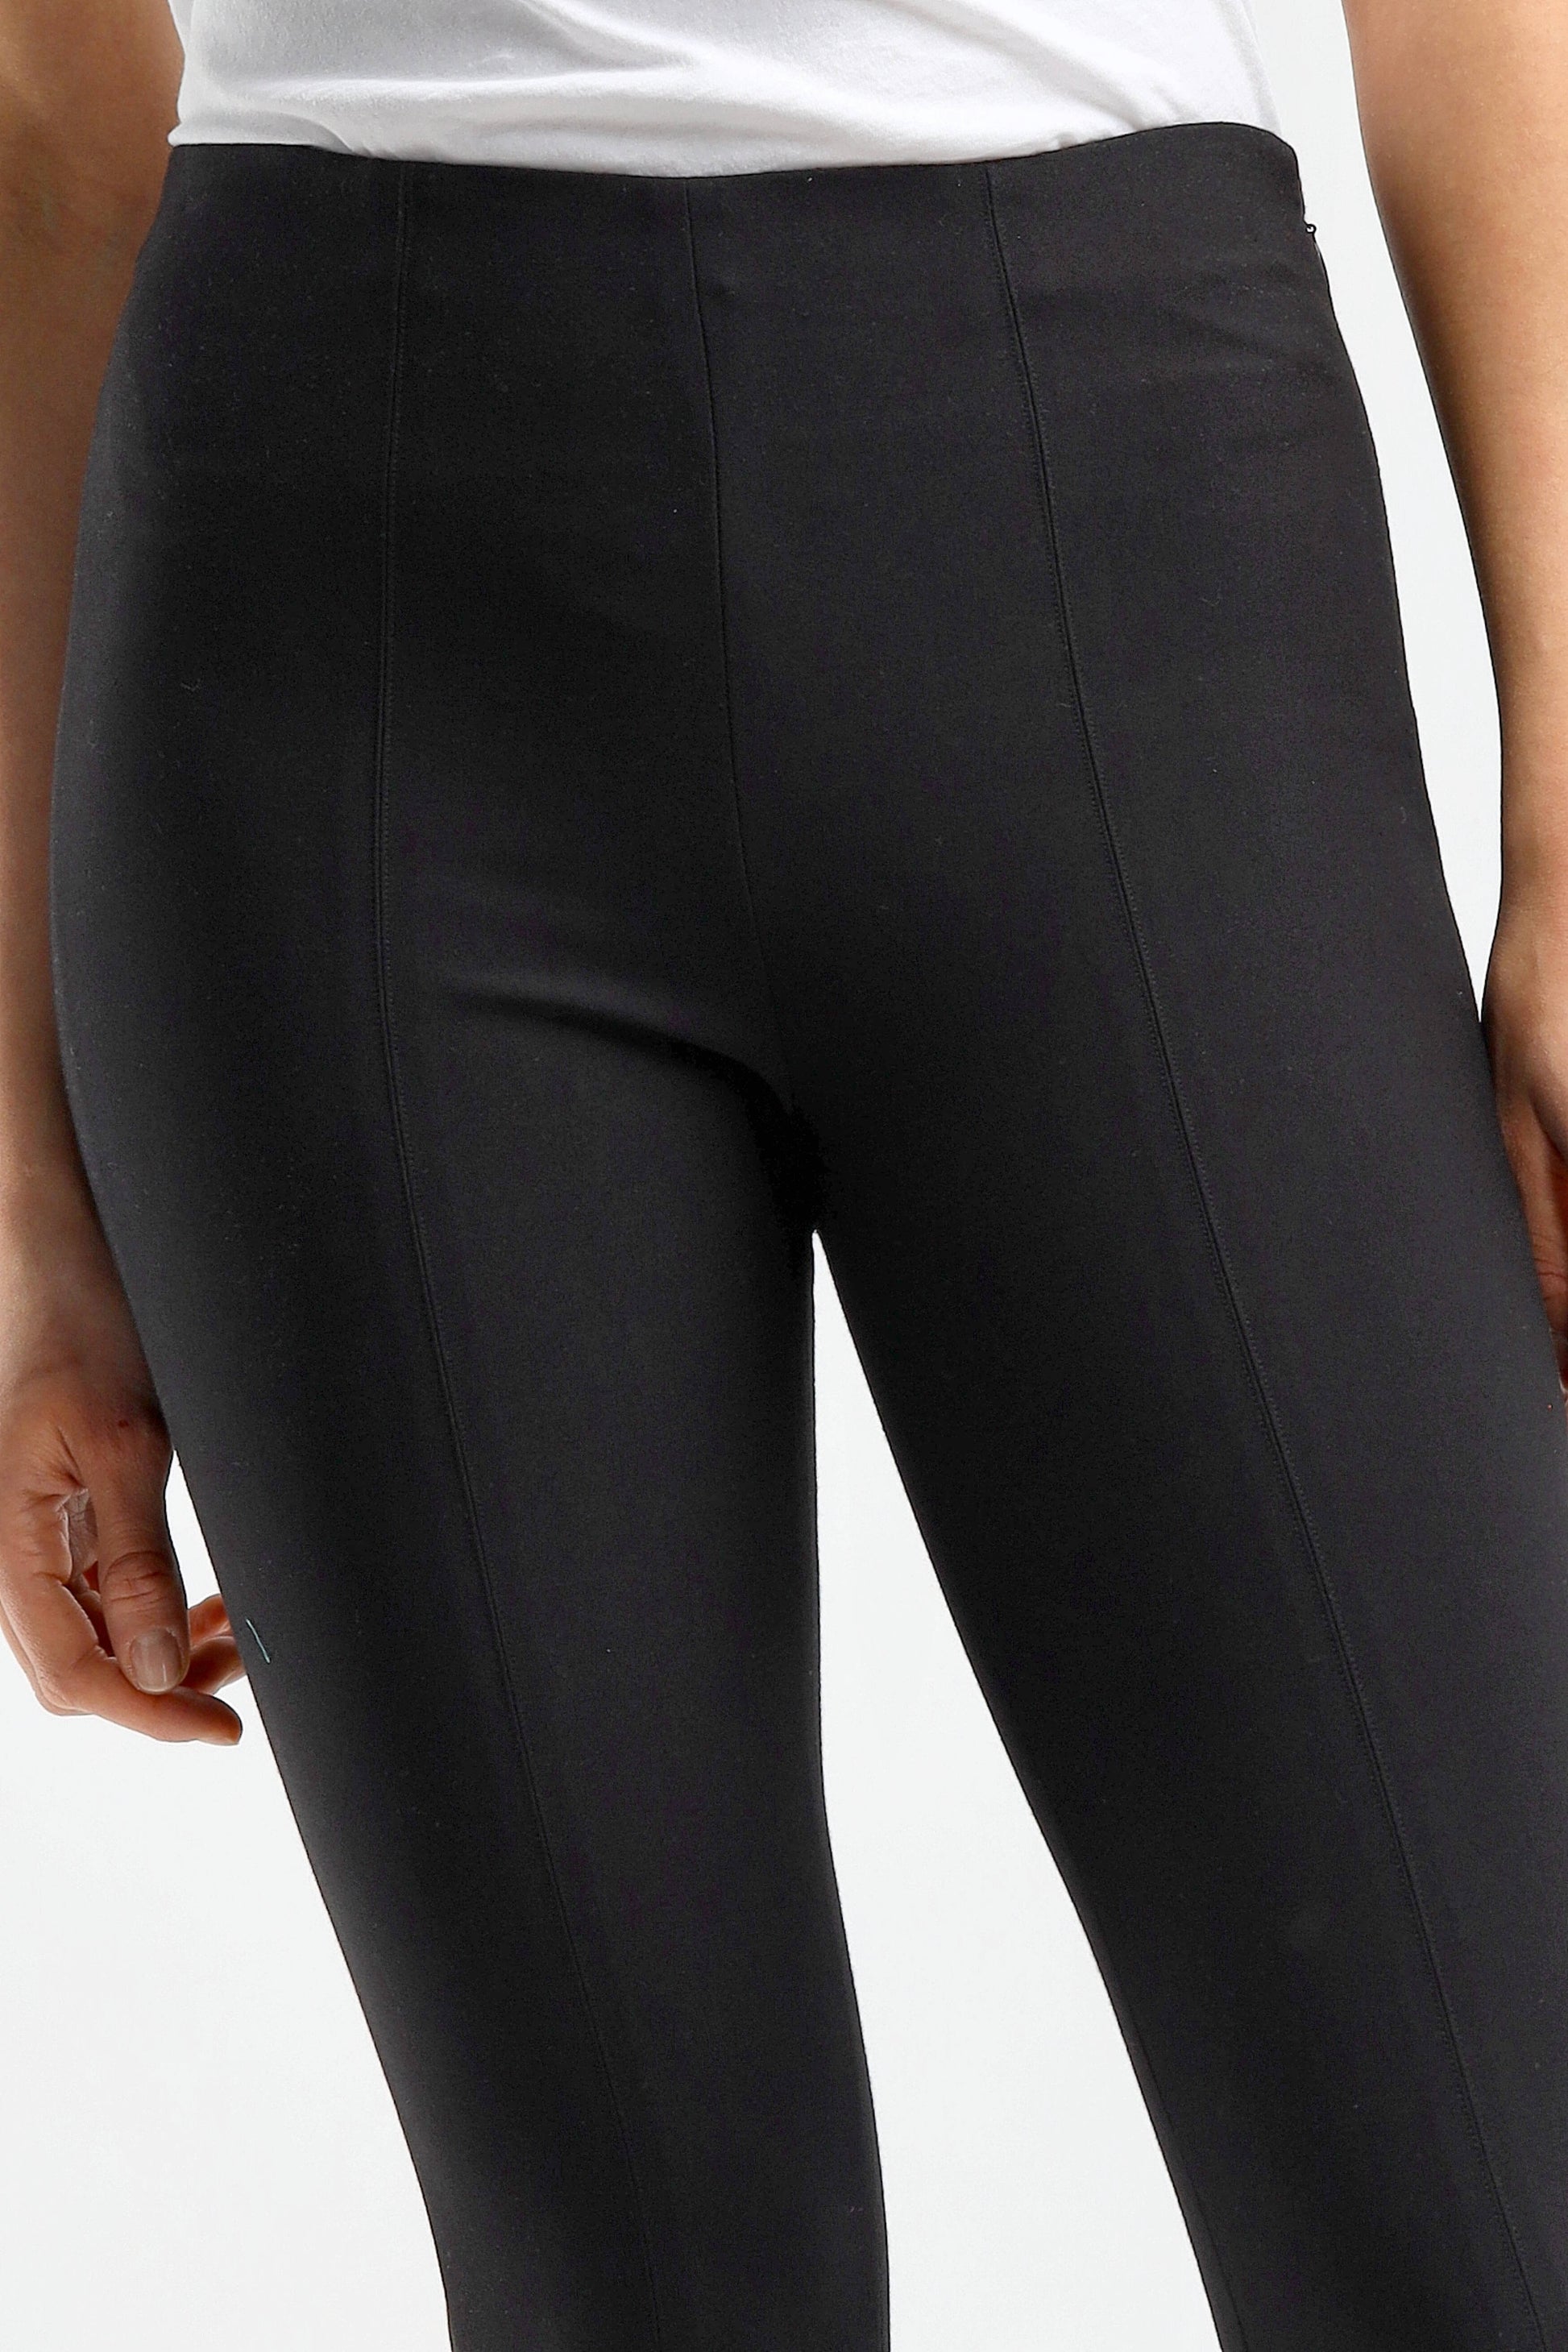 Leggings Stitch Front in SchwarzVince - Anita Hass